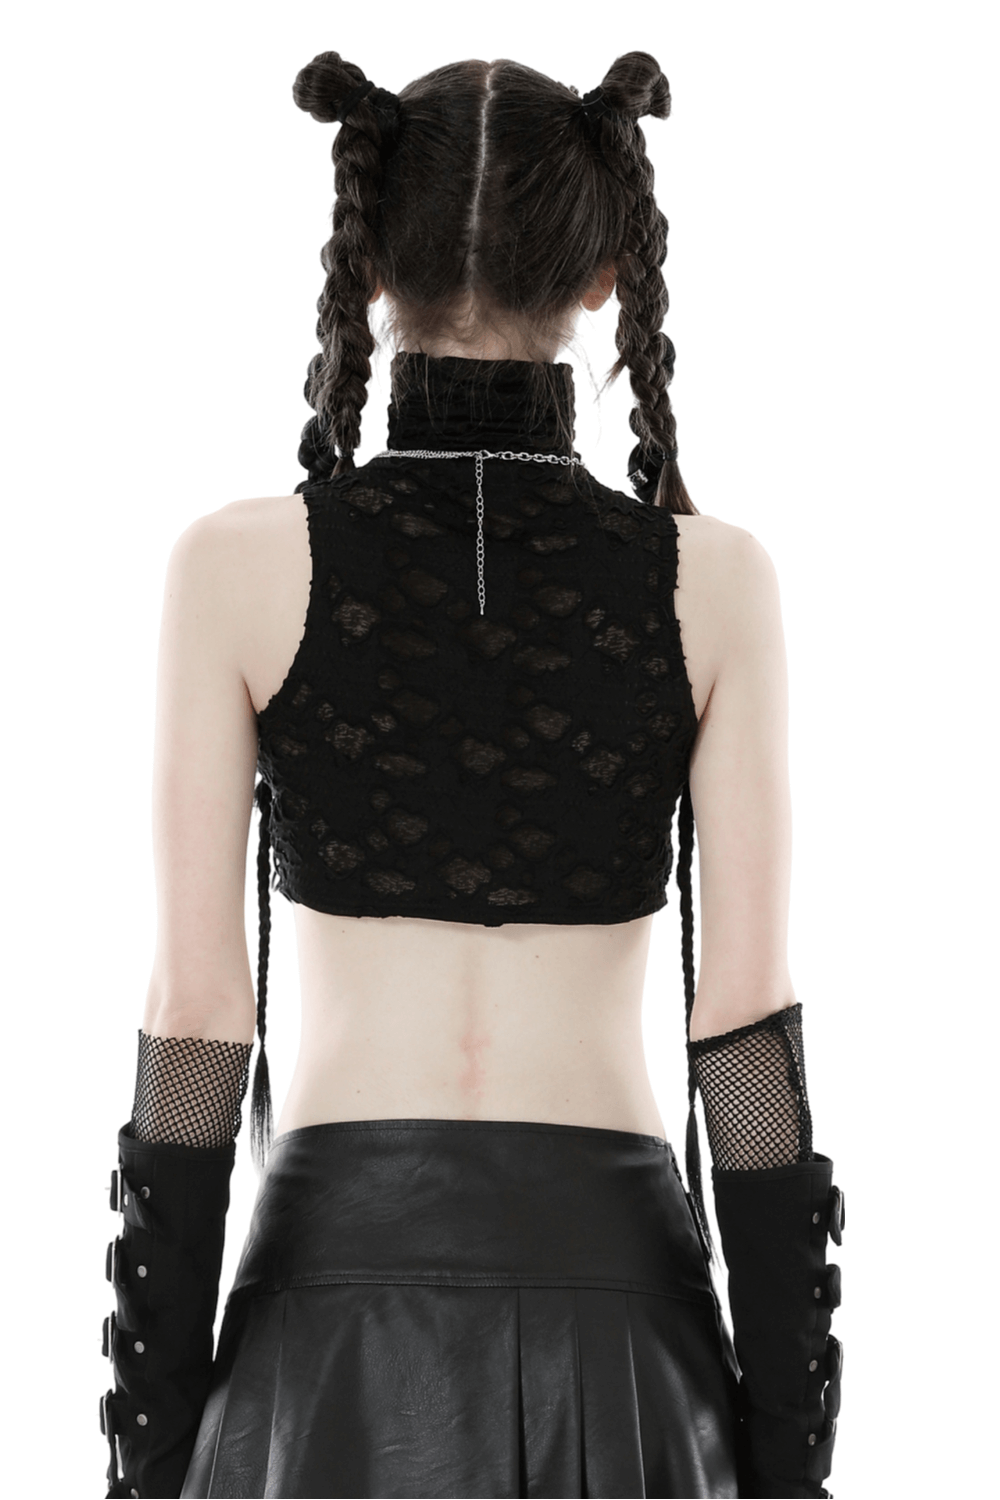 Punk Black Sleeveless Turtleneck Top with Lace-Up Sides